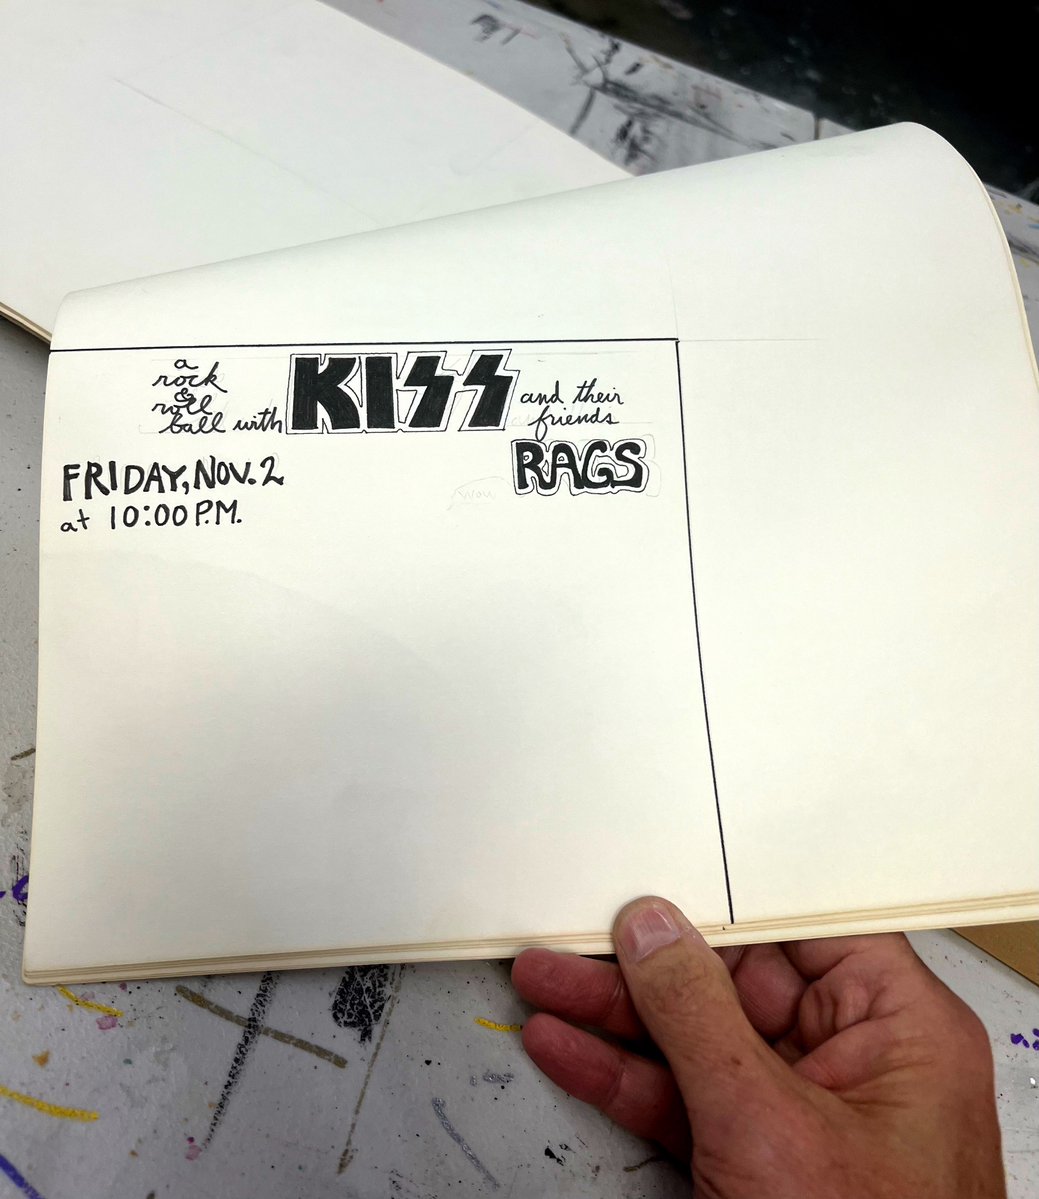 Going Through My Sketchbooks At The Warehouse! So many drawings and layouts from 1973.